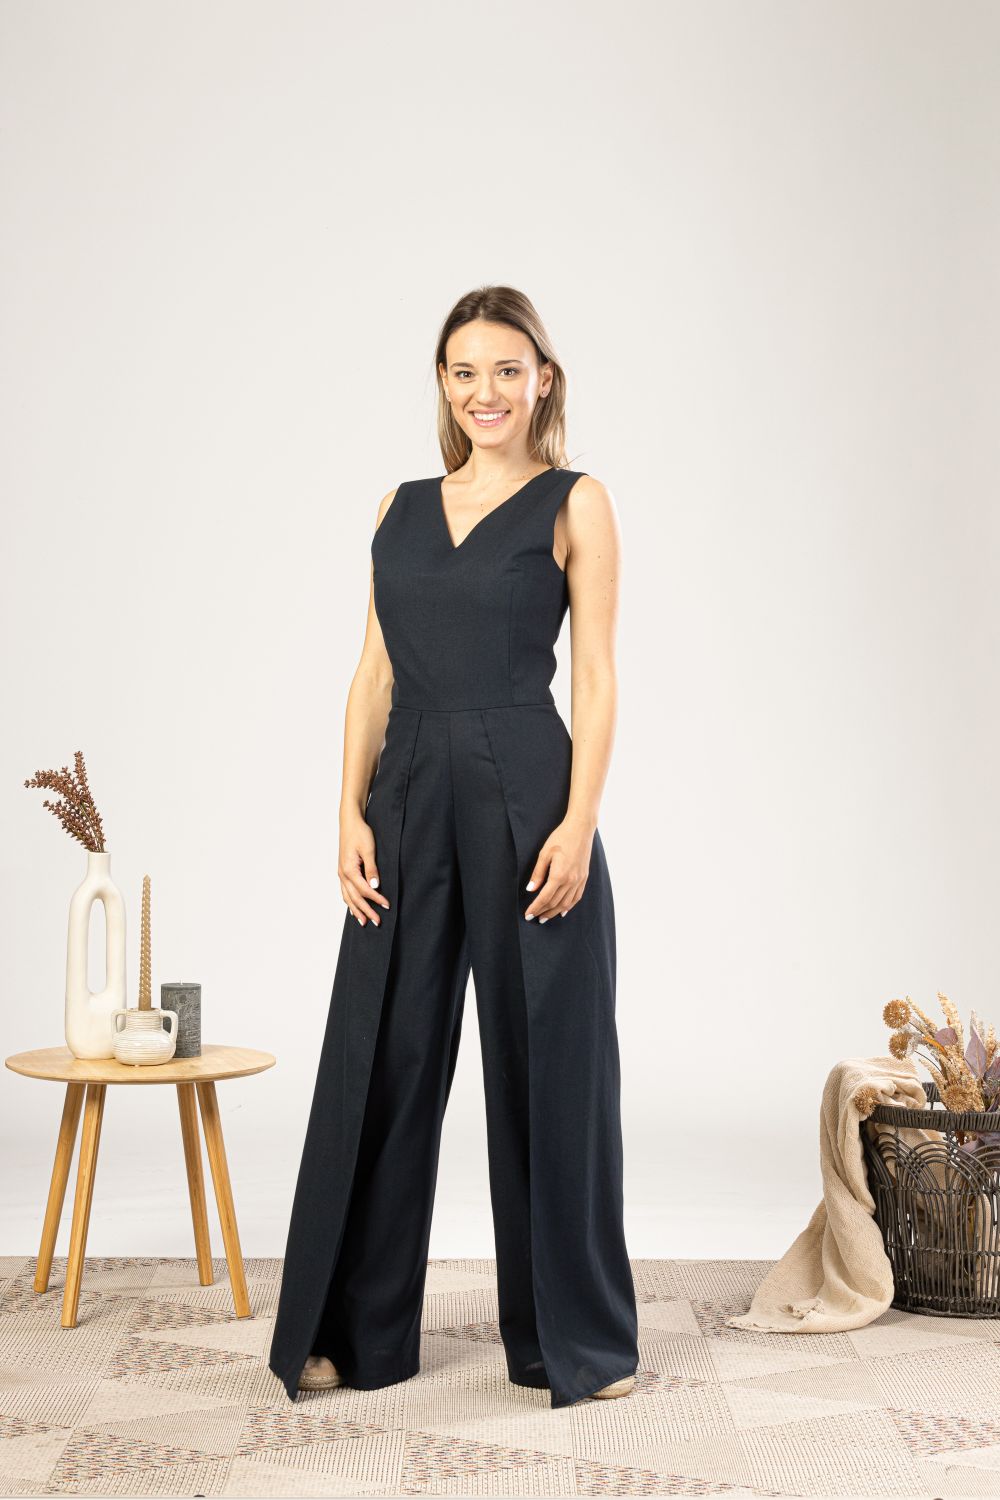 John Lewis's £48 easy-to-wear black jumpsuit 'ticks all the boxes'